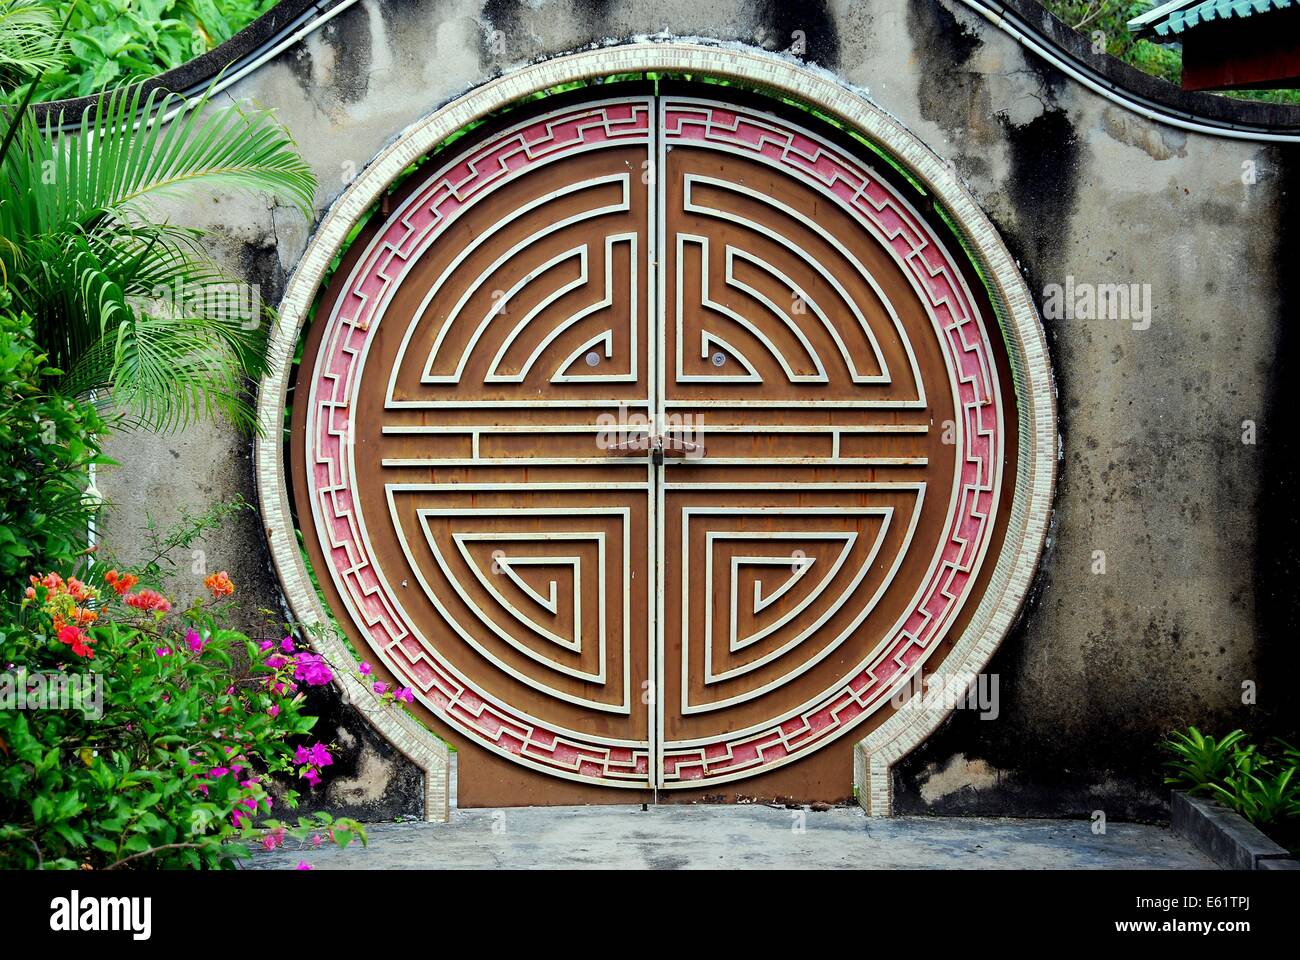 PENANG, MALAYSIA:  A laybrinth doorway in the gardens at the Snake Temple on Penang Island  * Stock Photo